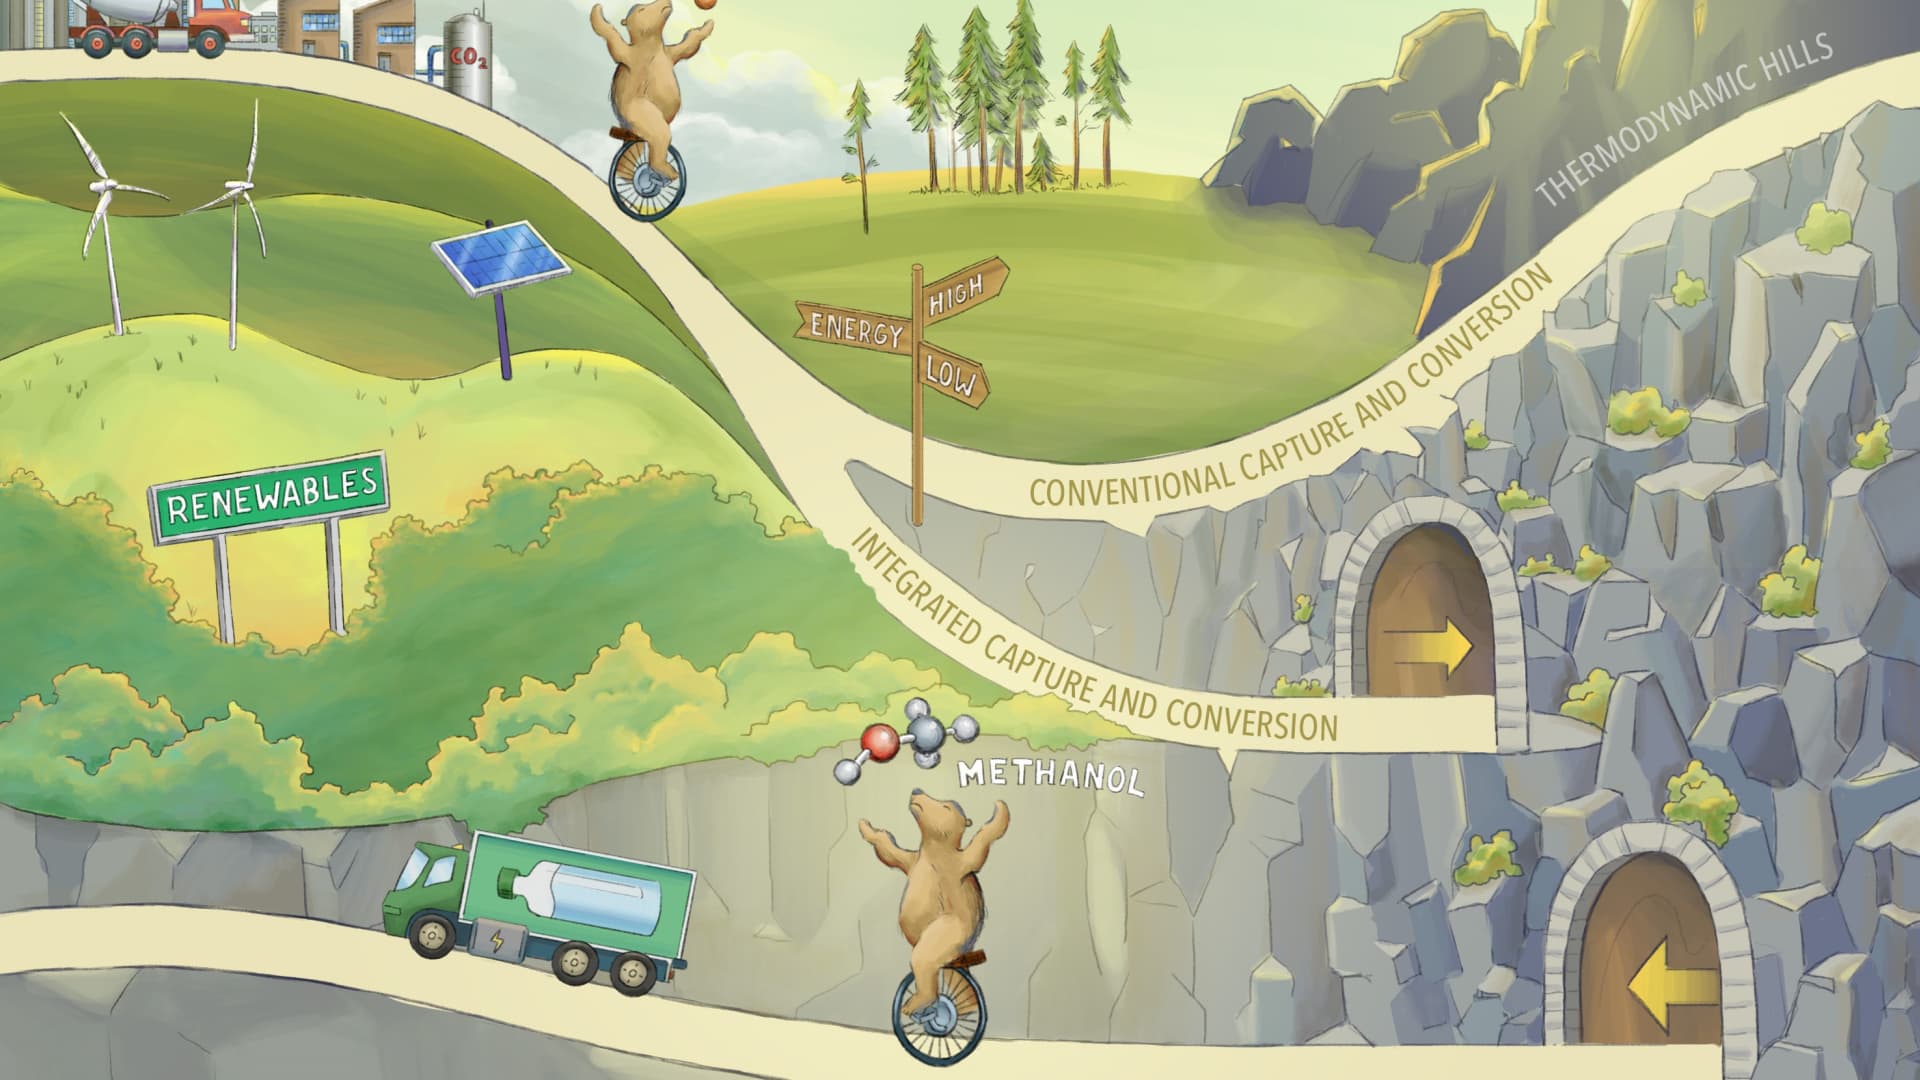 The infographic of the bear going through the tunnel in the mountain serves to represent efficiencies realized in making methanol from carbon capture.